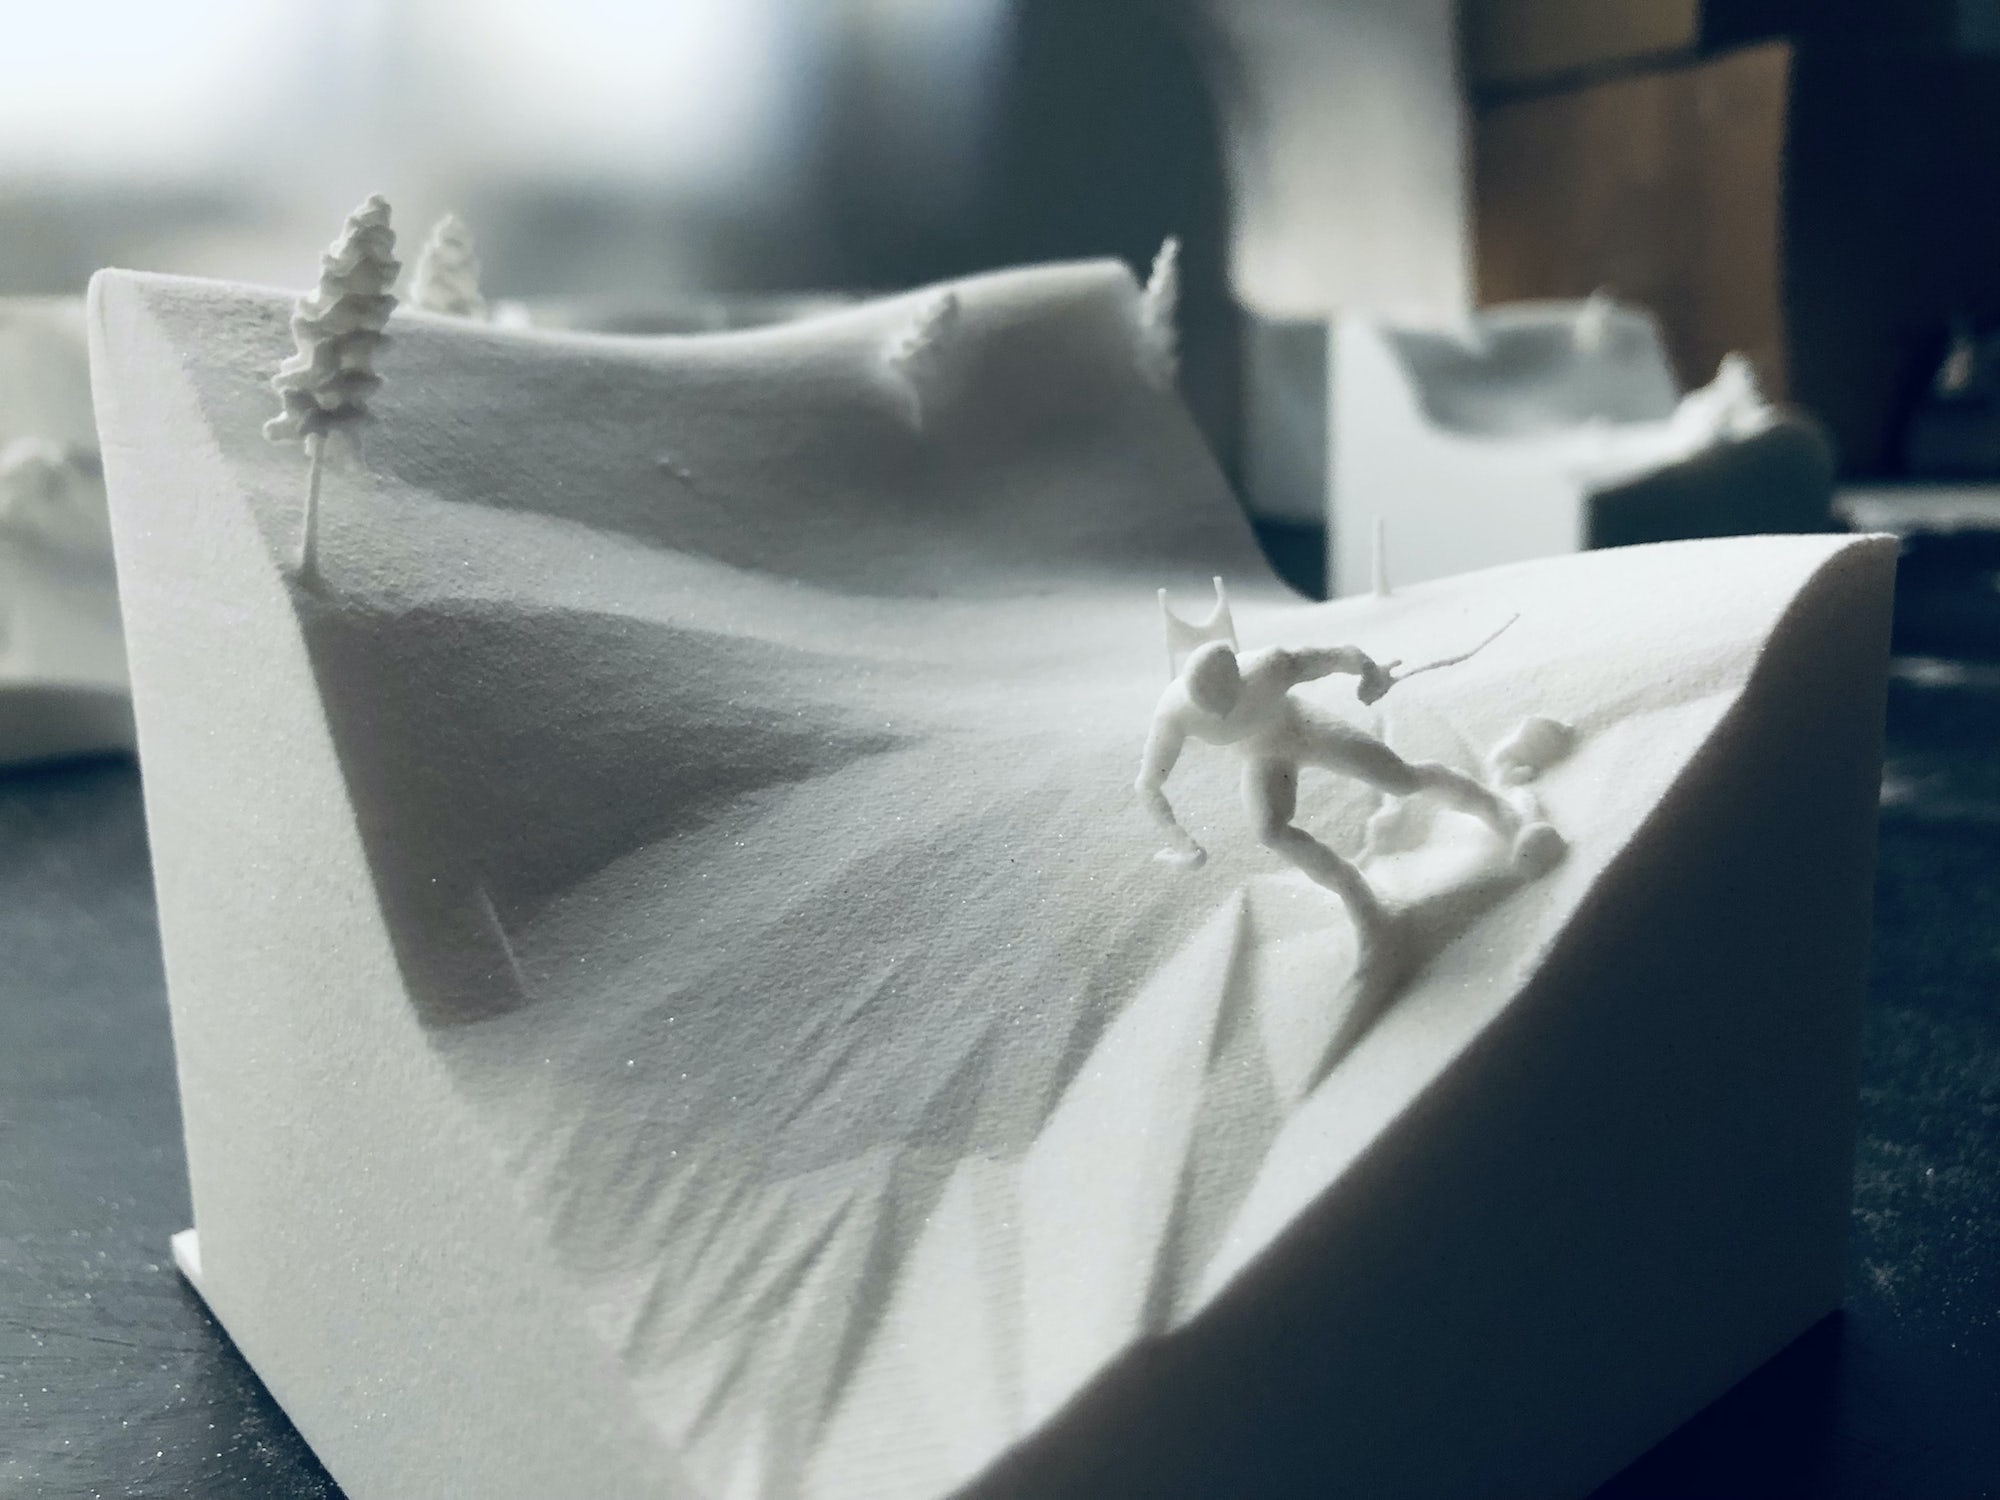 A 3D printed scene used in the stop-motion animation. Photo via BBC.